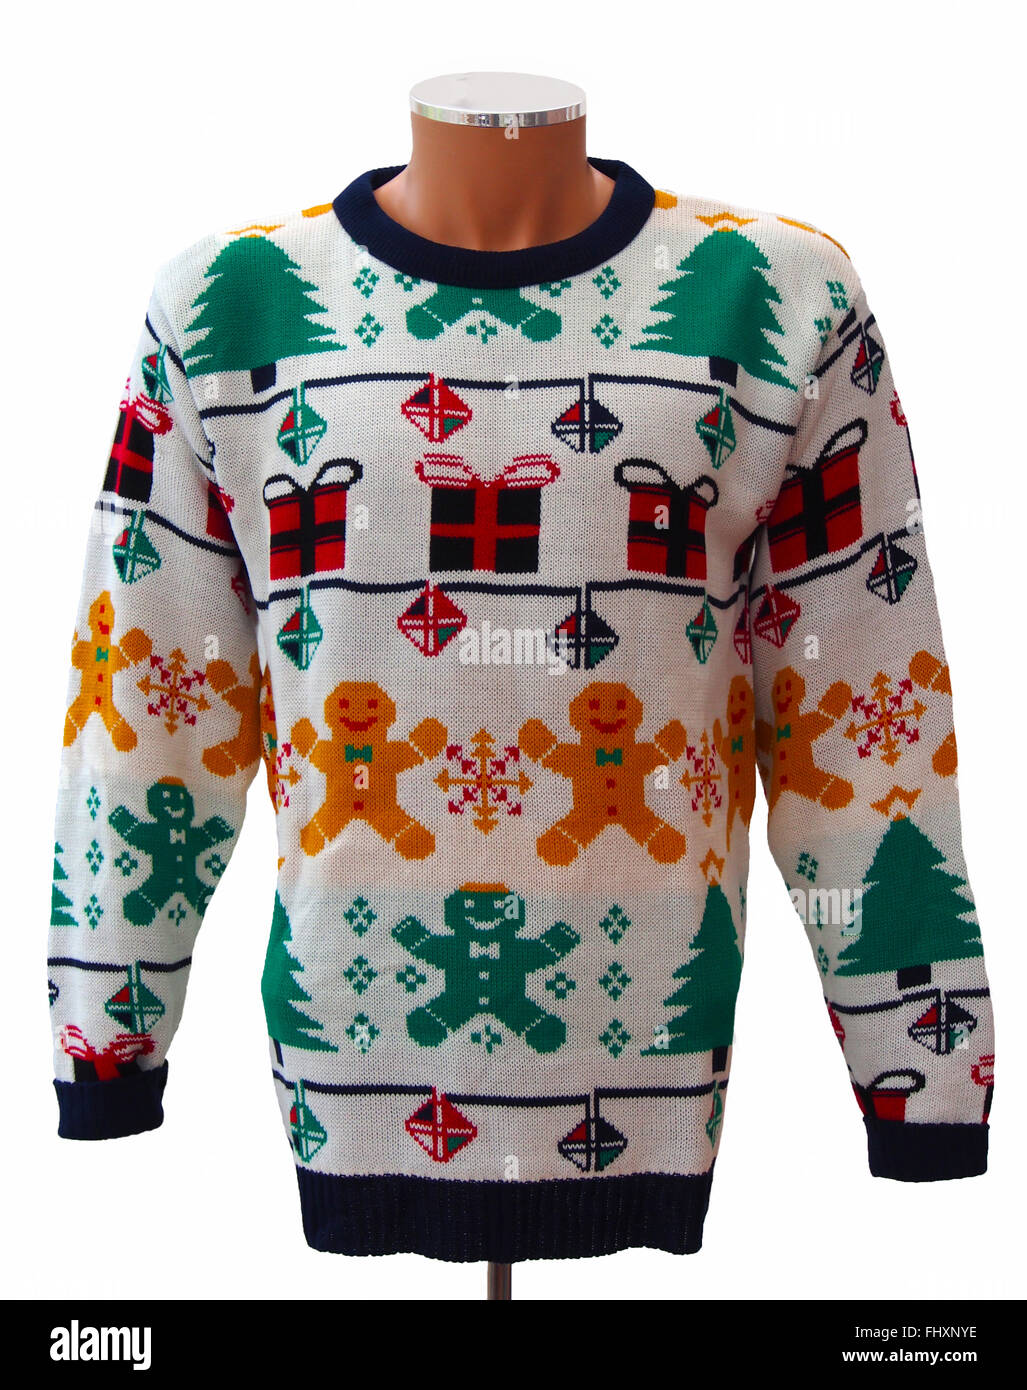 Traditional knitted adults' Christmas jumper, featuring Xmas presents and Xmas trees isolated on a white background. Stock Photo